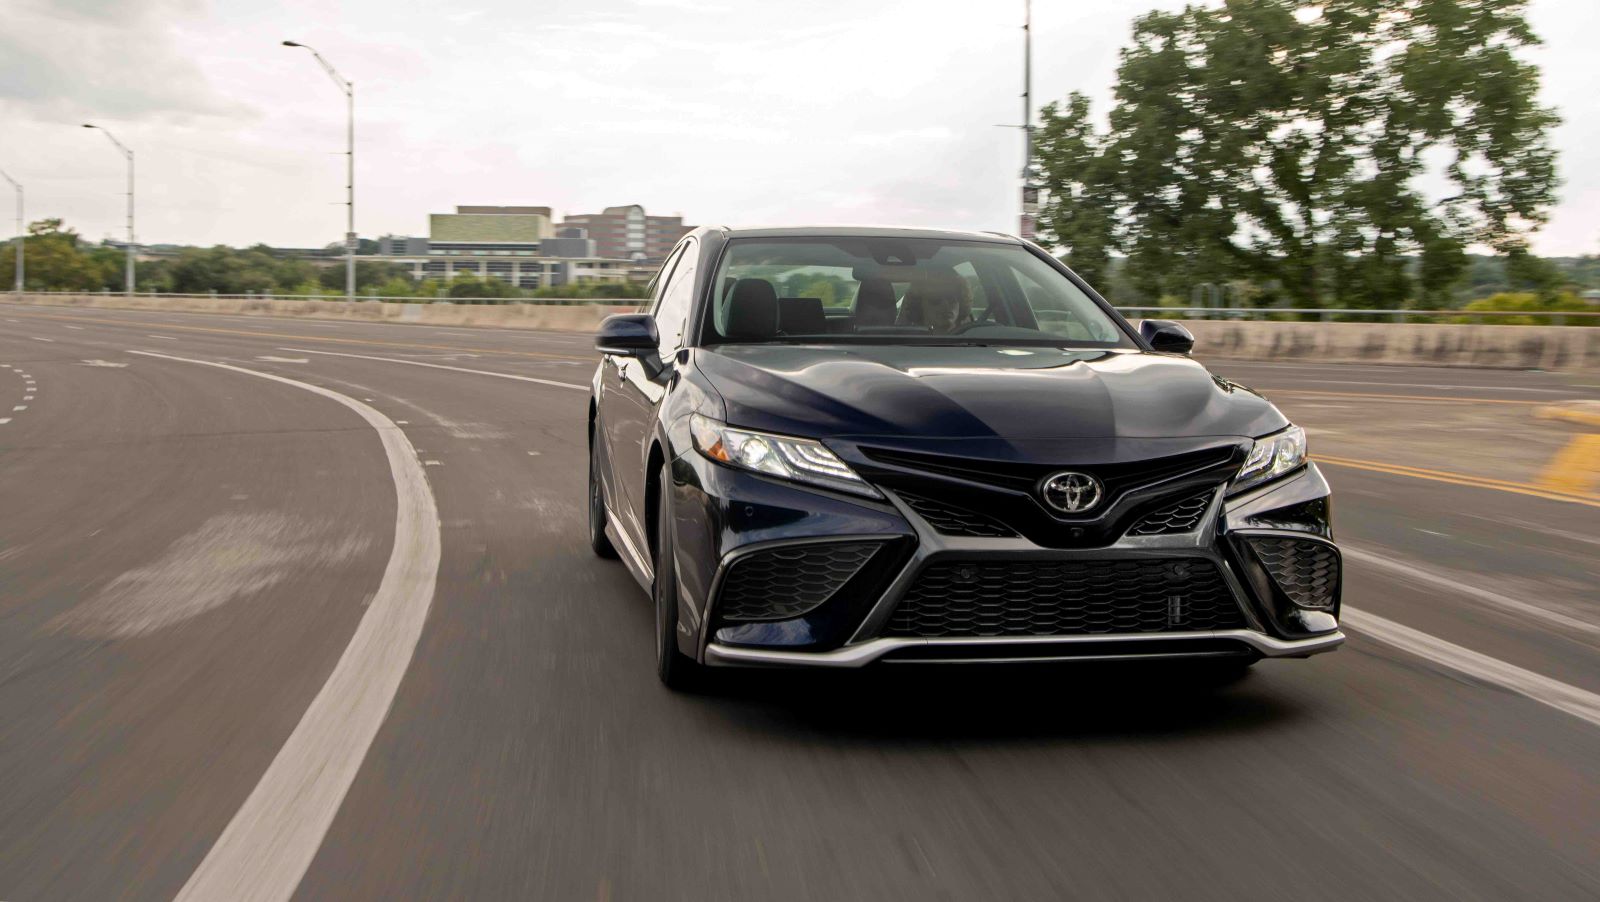 Front view of a black 2022 Toyota Camry in motion. The new Camry is one of the best-selling new cars of 2022